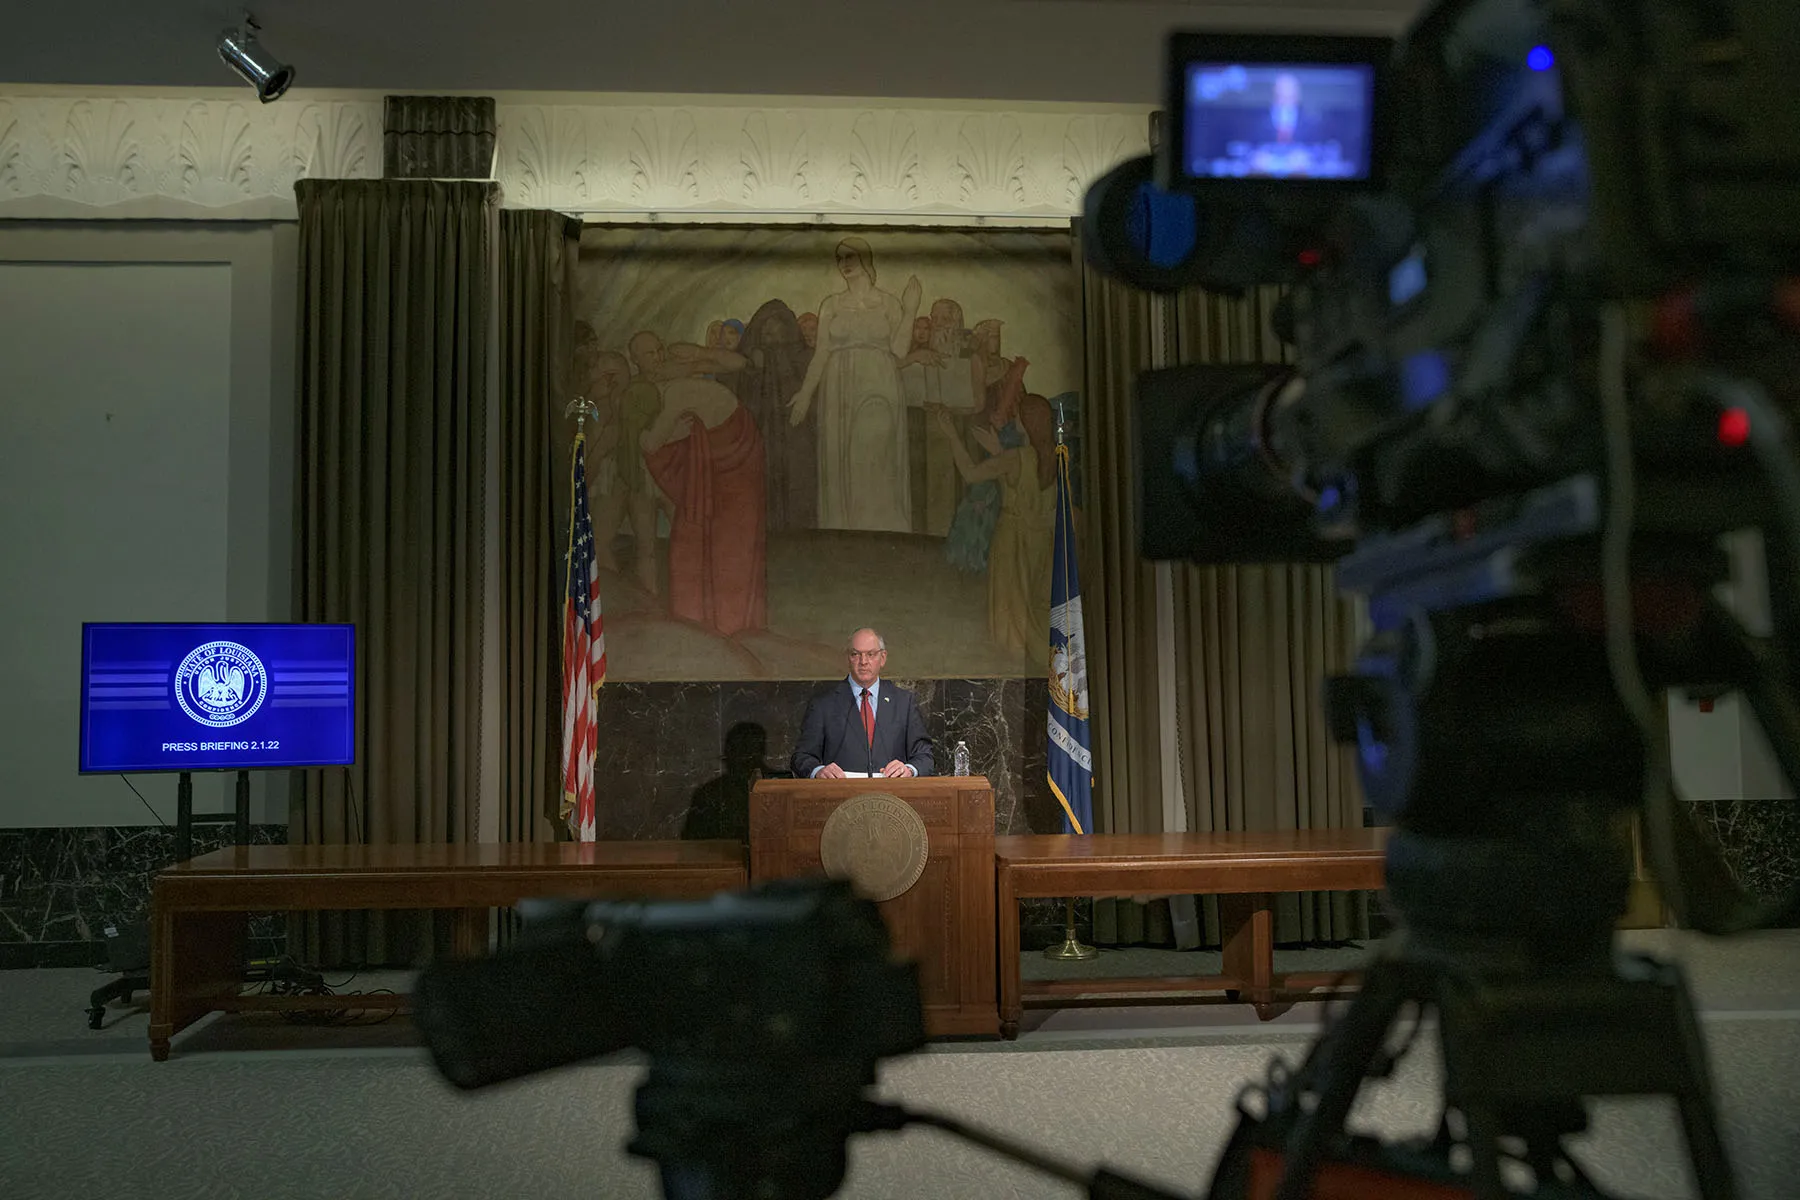 Louisiana Governor John Bel Edwards speaks during a press briefing. He is standing at a podium in the background of the image. In the foreground, a camera is seen recording the briefing.